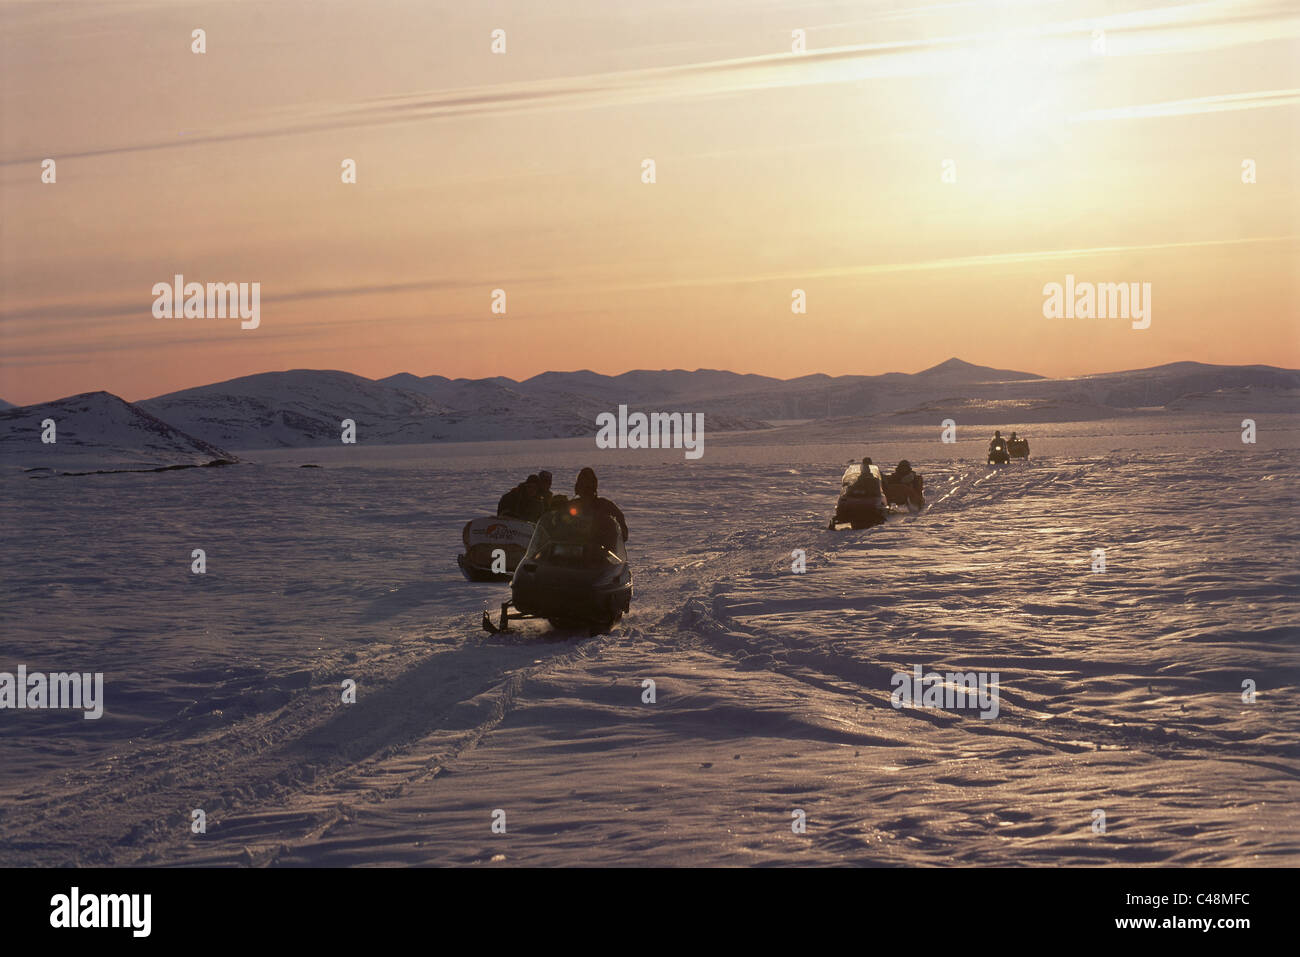 Image of a convoy of motorbikes on the ice plains of Baffin Canada Stock Photo